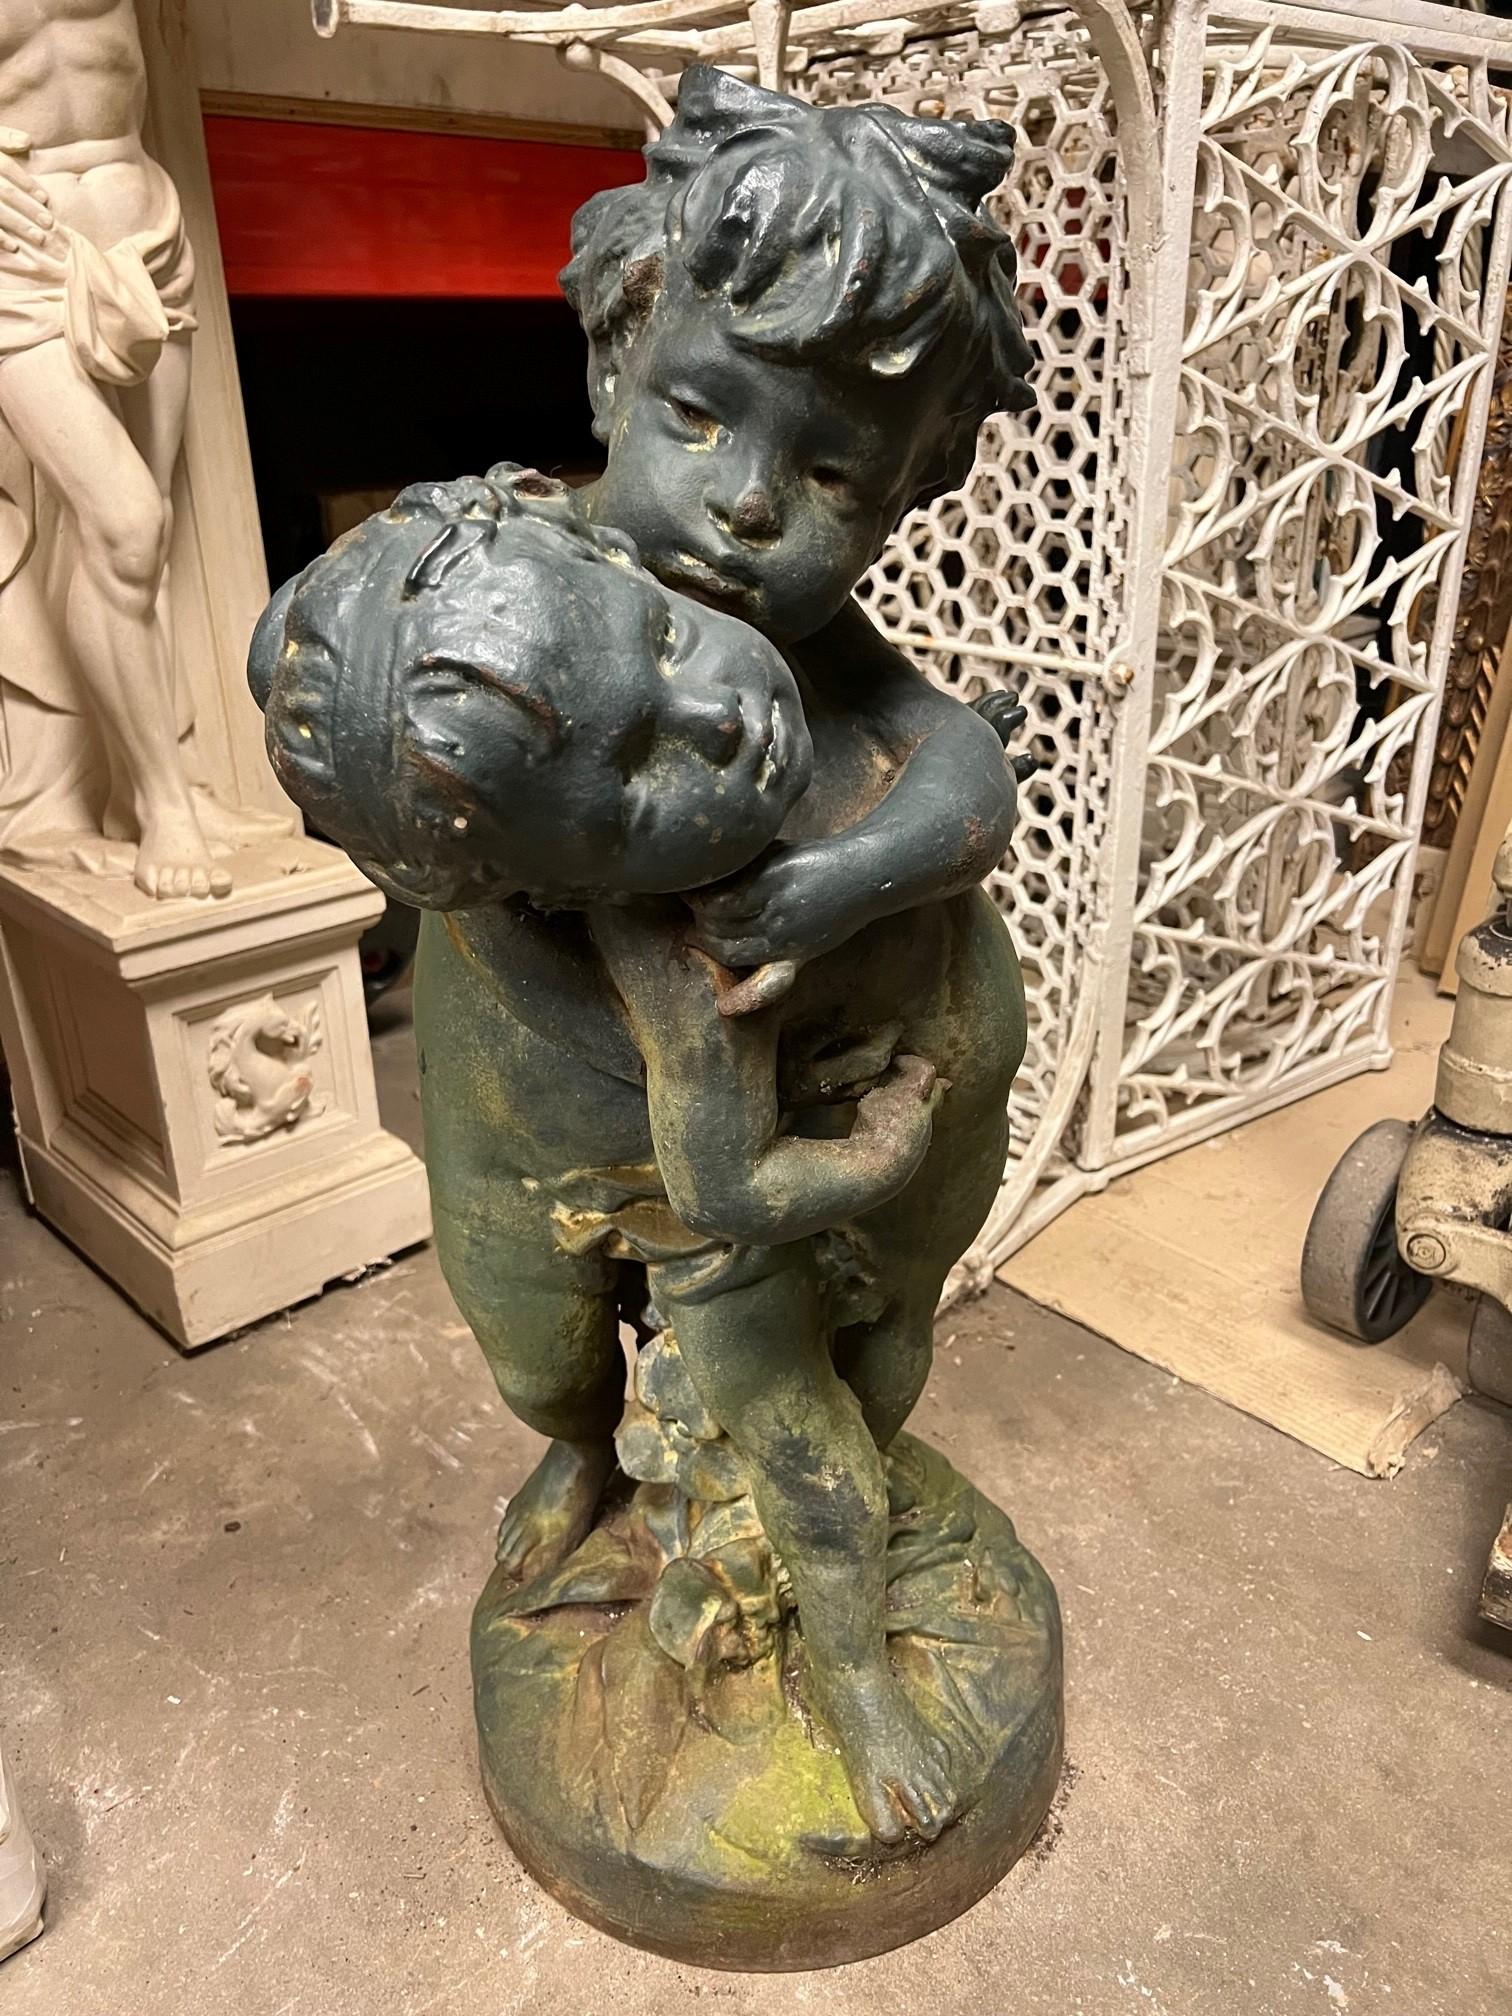 Cast Iron statue of two boys playing by the Salin Foundry in Paris France. The Salin Foundry has a long history dating back to 1806 by the Vivaux brothers. The foundry was taken over by Mr Auguste Salin and became the Salin Foundry in 1875. The